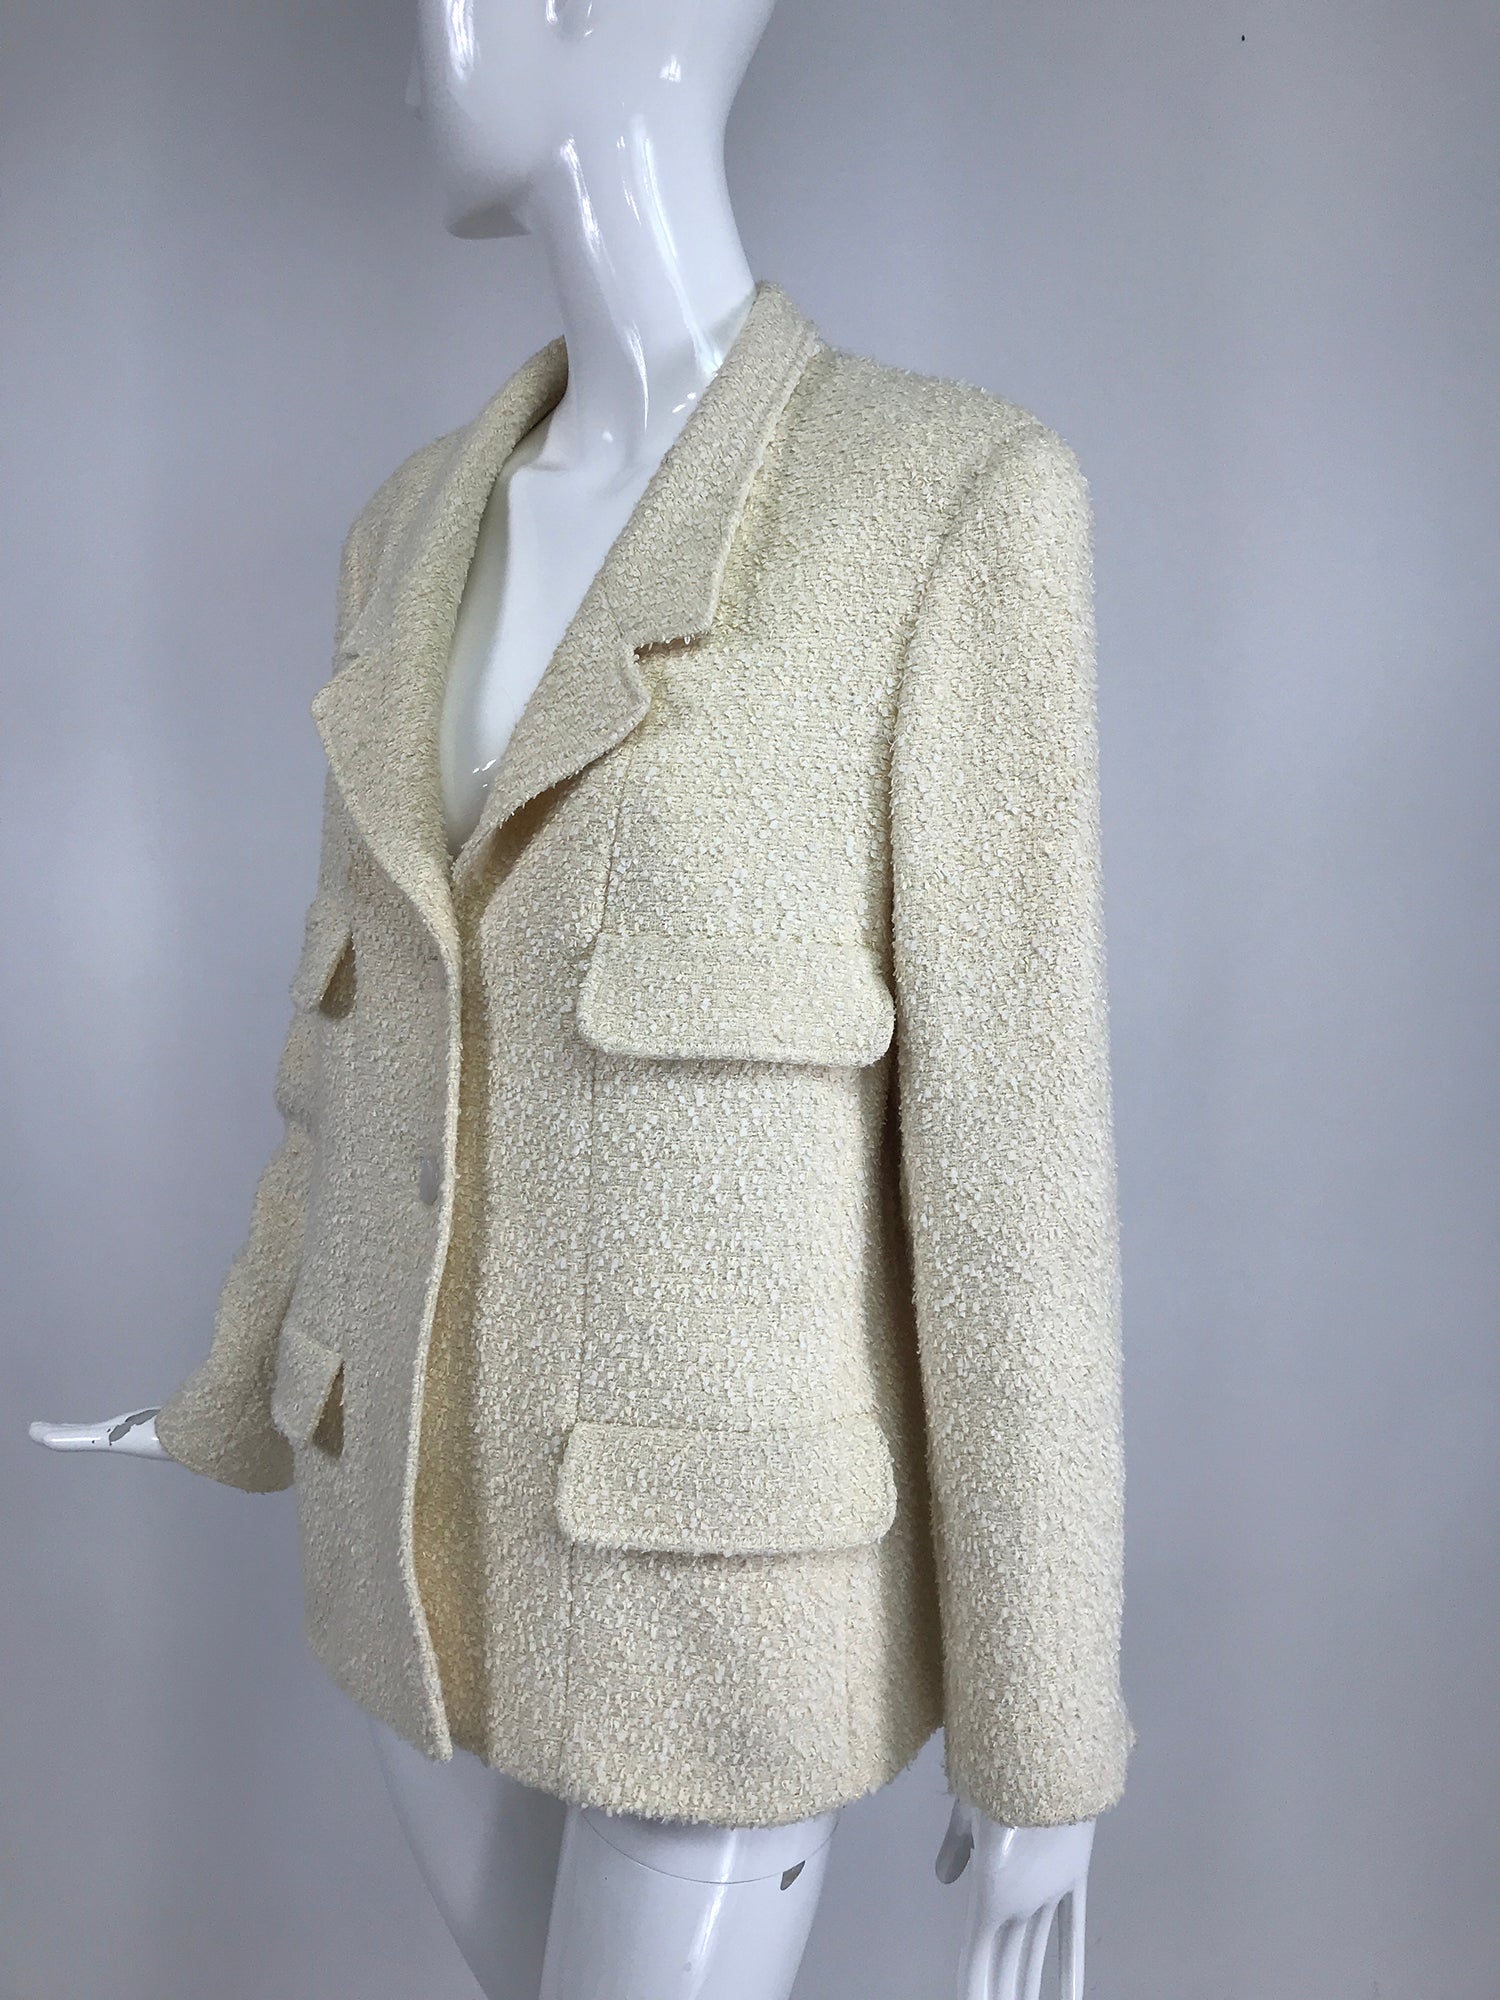 SOLD Chanel Cream Boucle 4 Pocket Jacket 1998C Mother of Pearl